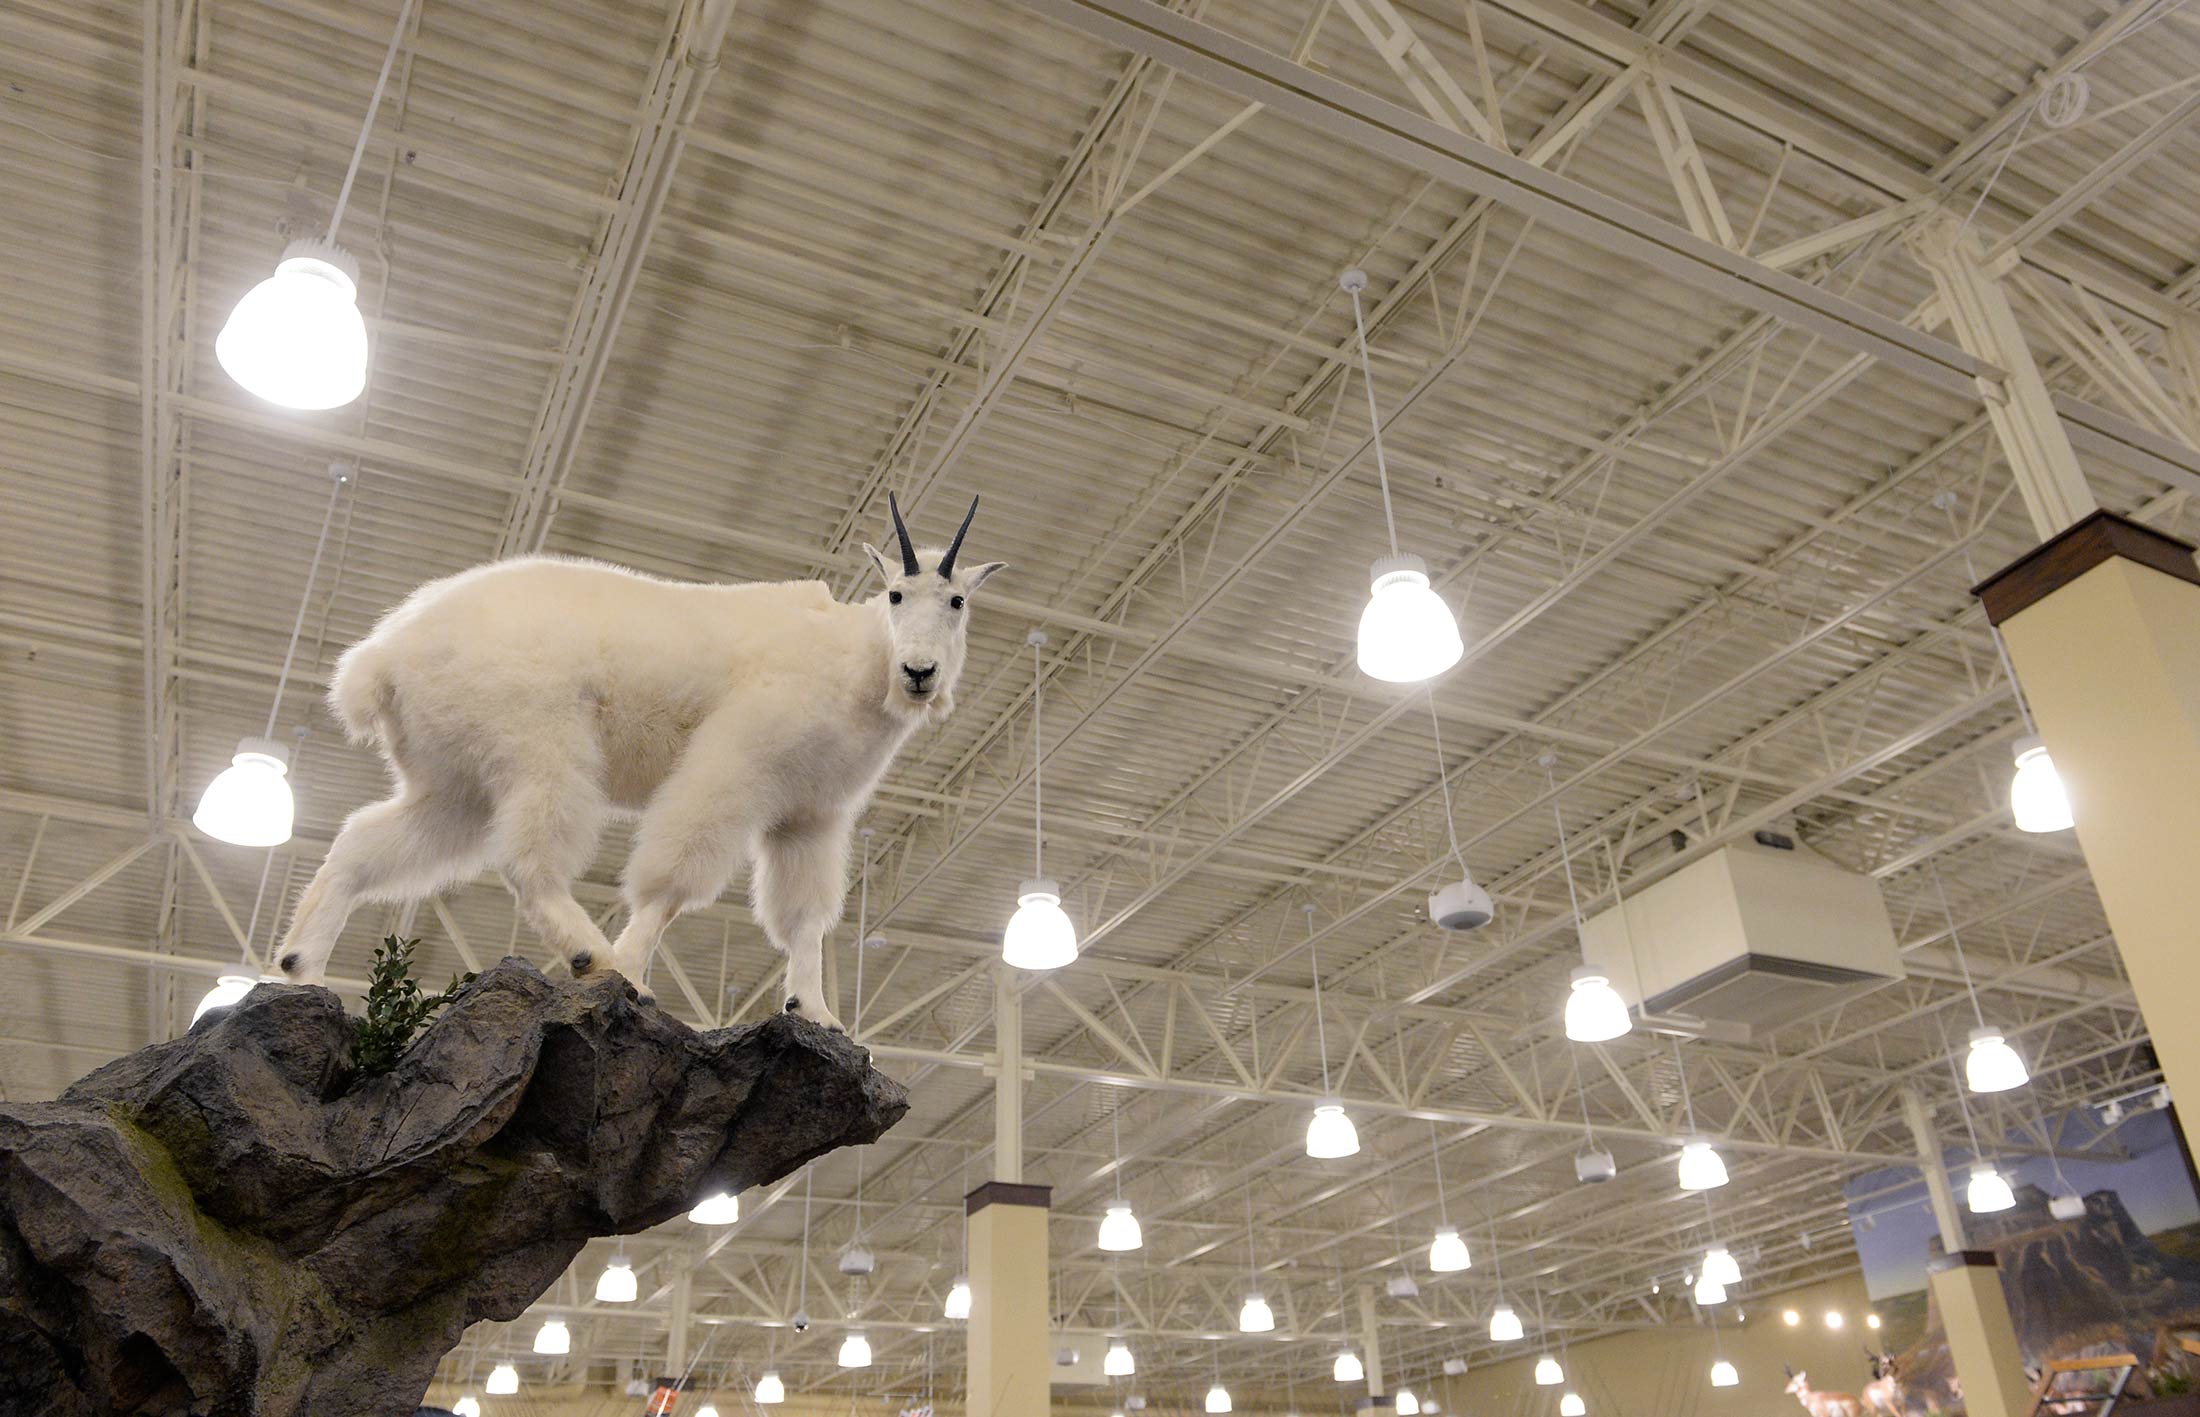 A taxidermy mountain goat is one of several taxidermy animals on display at the Cabela's store in Thornton, Colo.